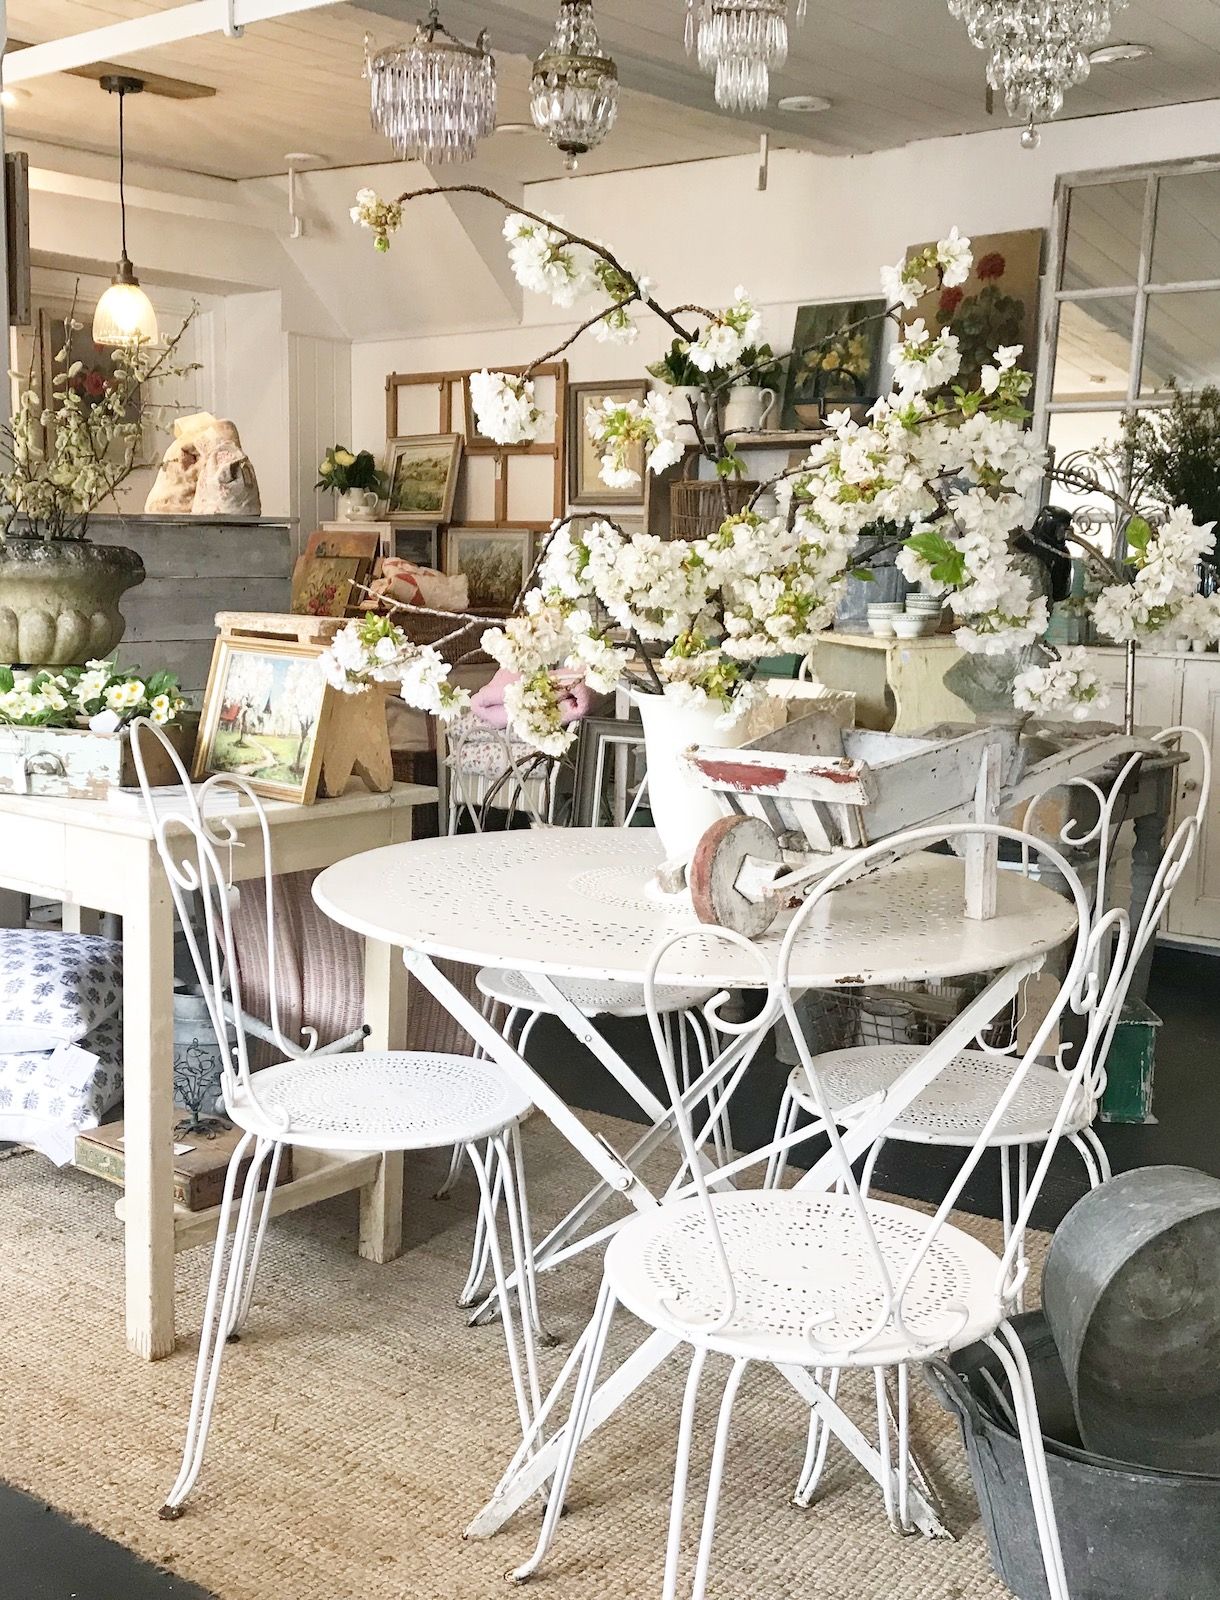 The Country Brocante | Decorative Country Living